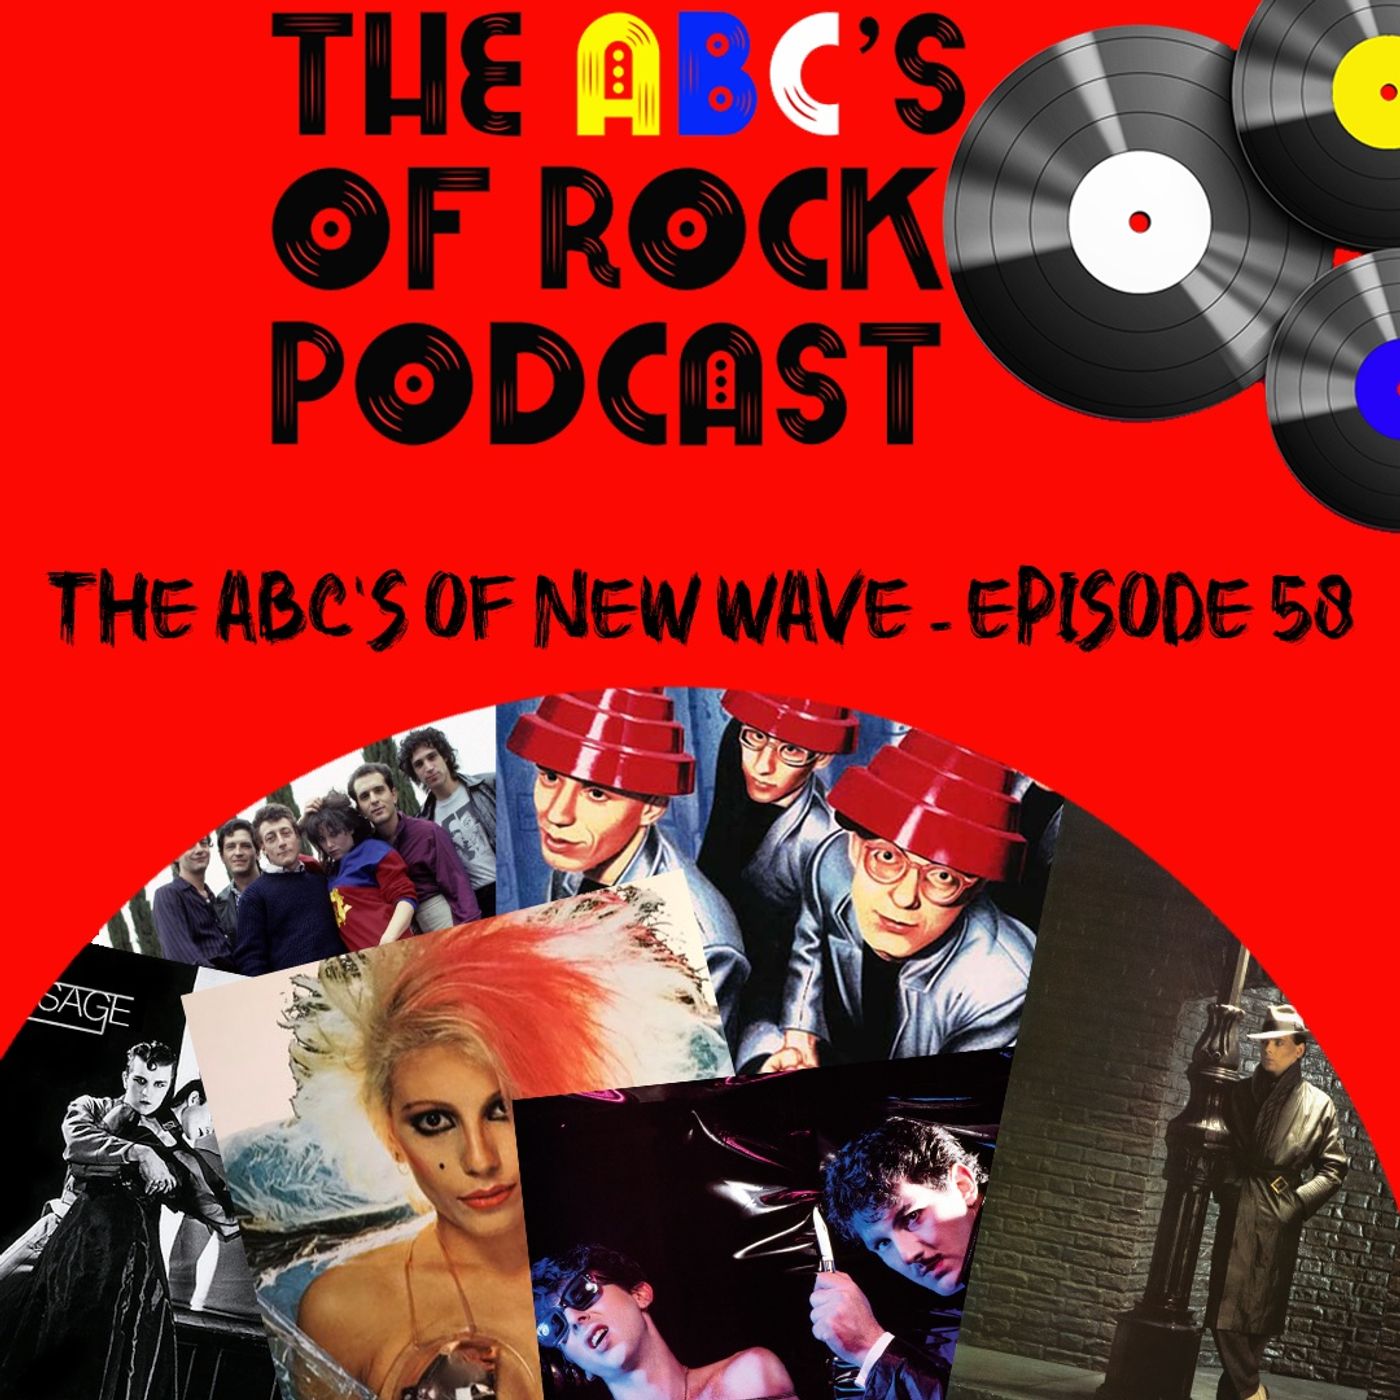 The ABC's of New Wave - Episode 58